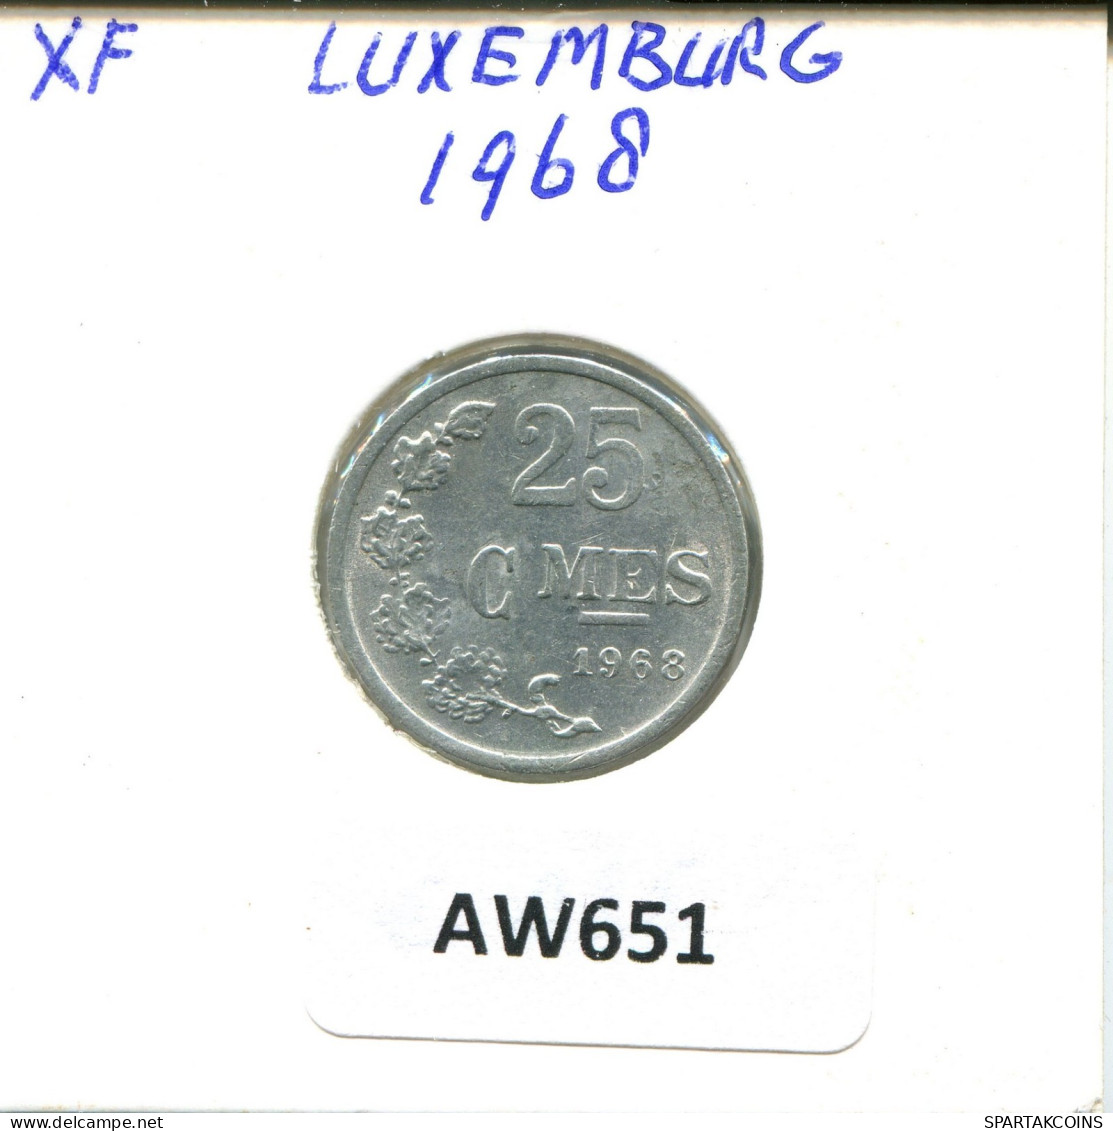 25 CENTIMES 1968 LUXEMBURG LUXEMBOURG Münze #AW651.D.A - Luxemburgo